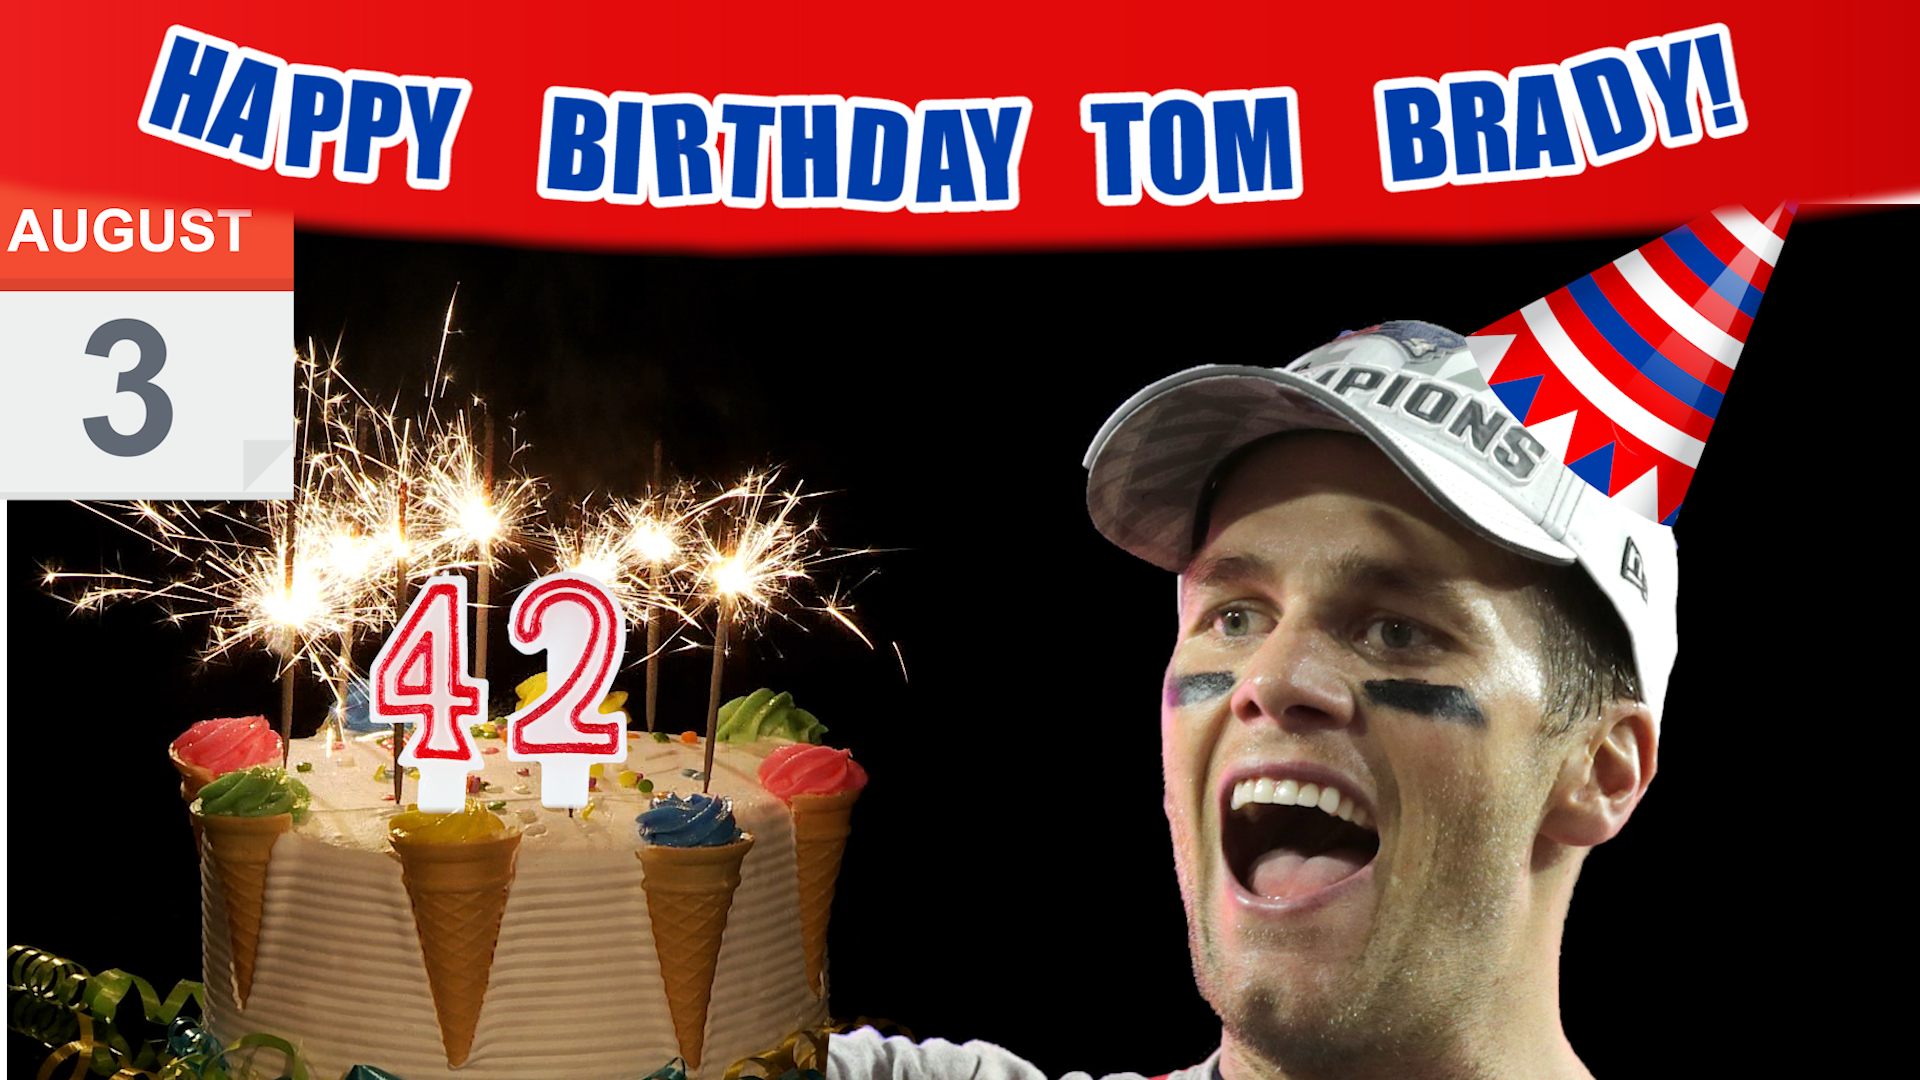 MLB - Happy birthday, Tom Brady! Remember, he was drafted by the